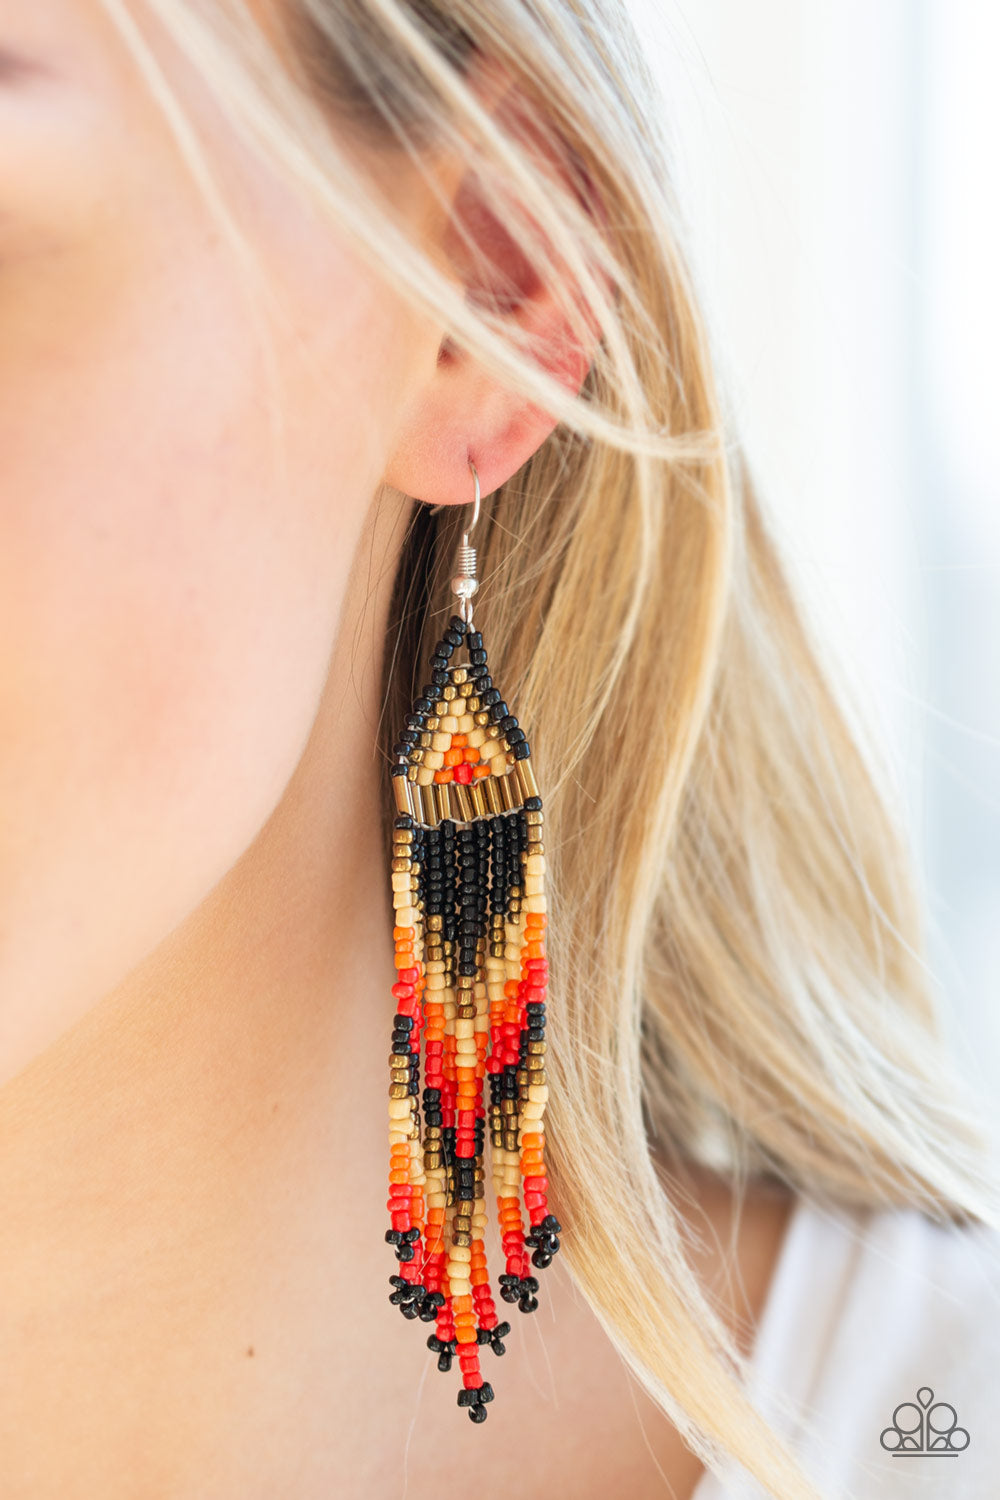 Colors Of The Wind Black Seed Bead Earring - Paparazzi Accessories  Item #P5TR-BKXX-093XX Infused with brassy metallic accents, black, orange, red, tan, and brass seed beads cascade from the ear in a vivacious beaded fringe. Earring attaches to a standard fishhook fitting.  Sold as one pair of earrings.